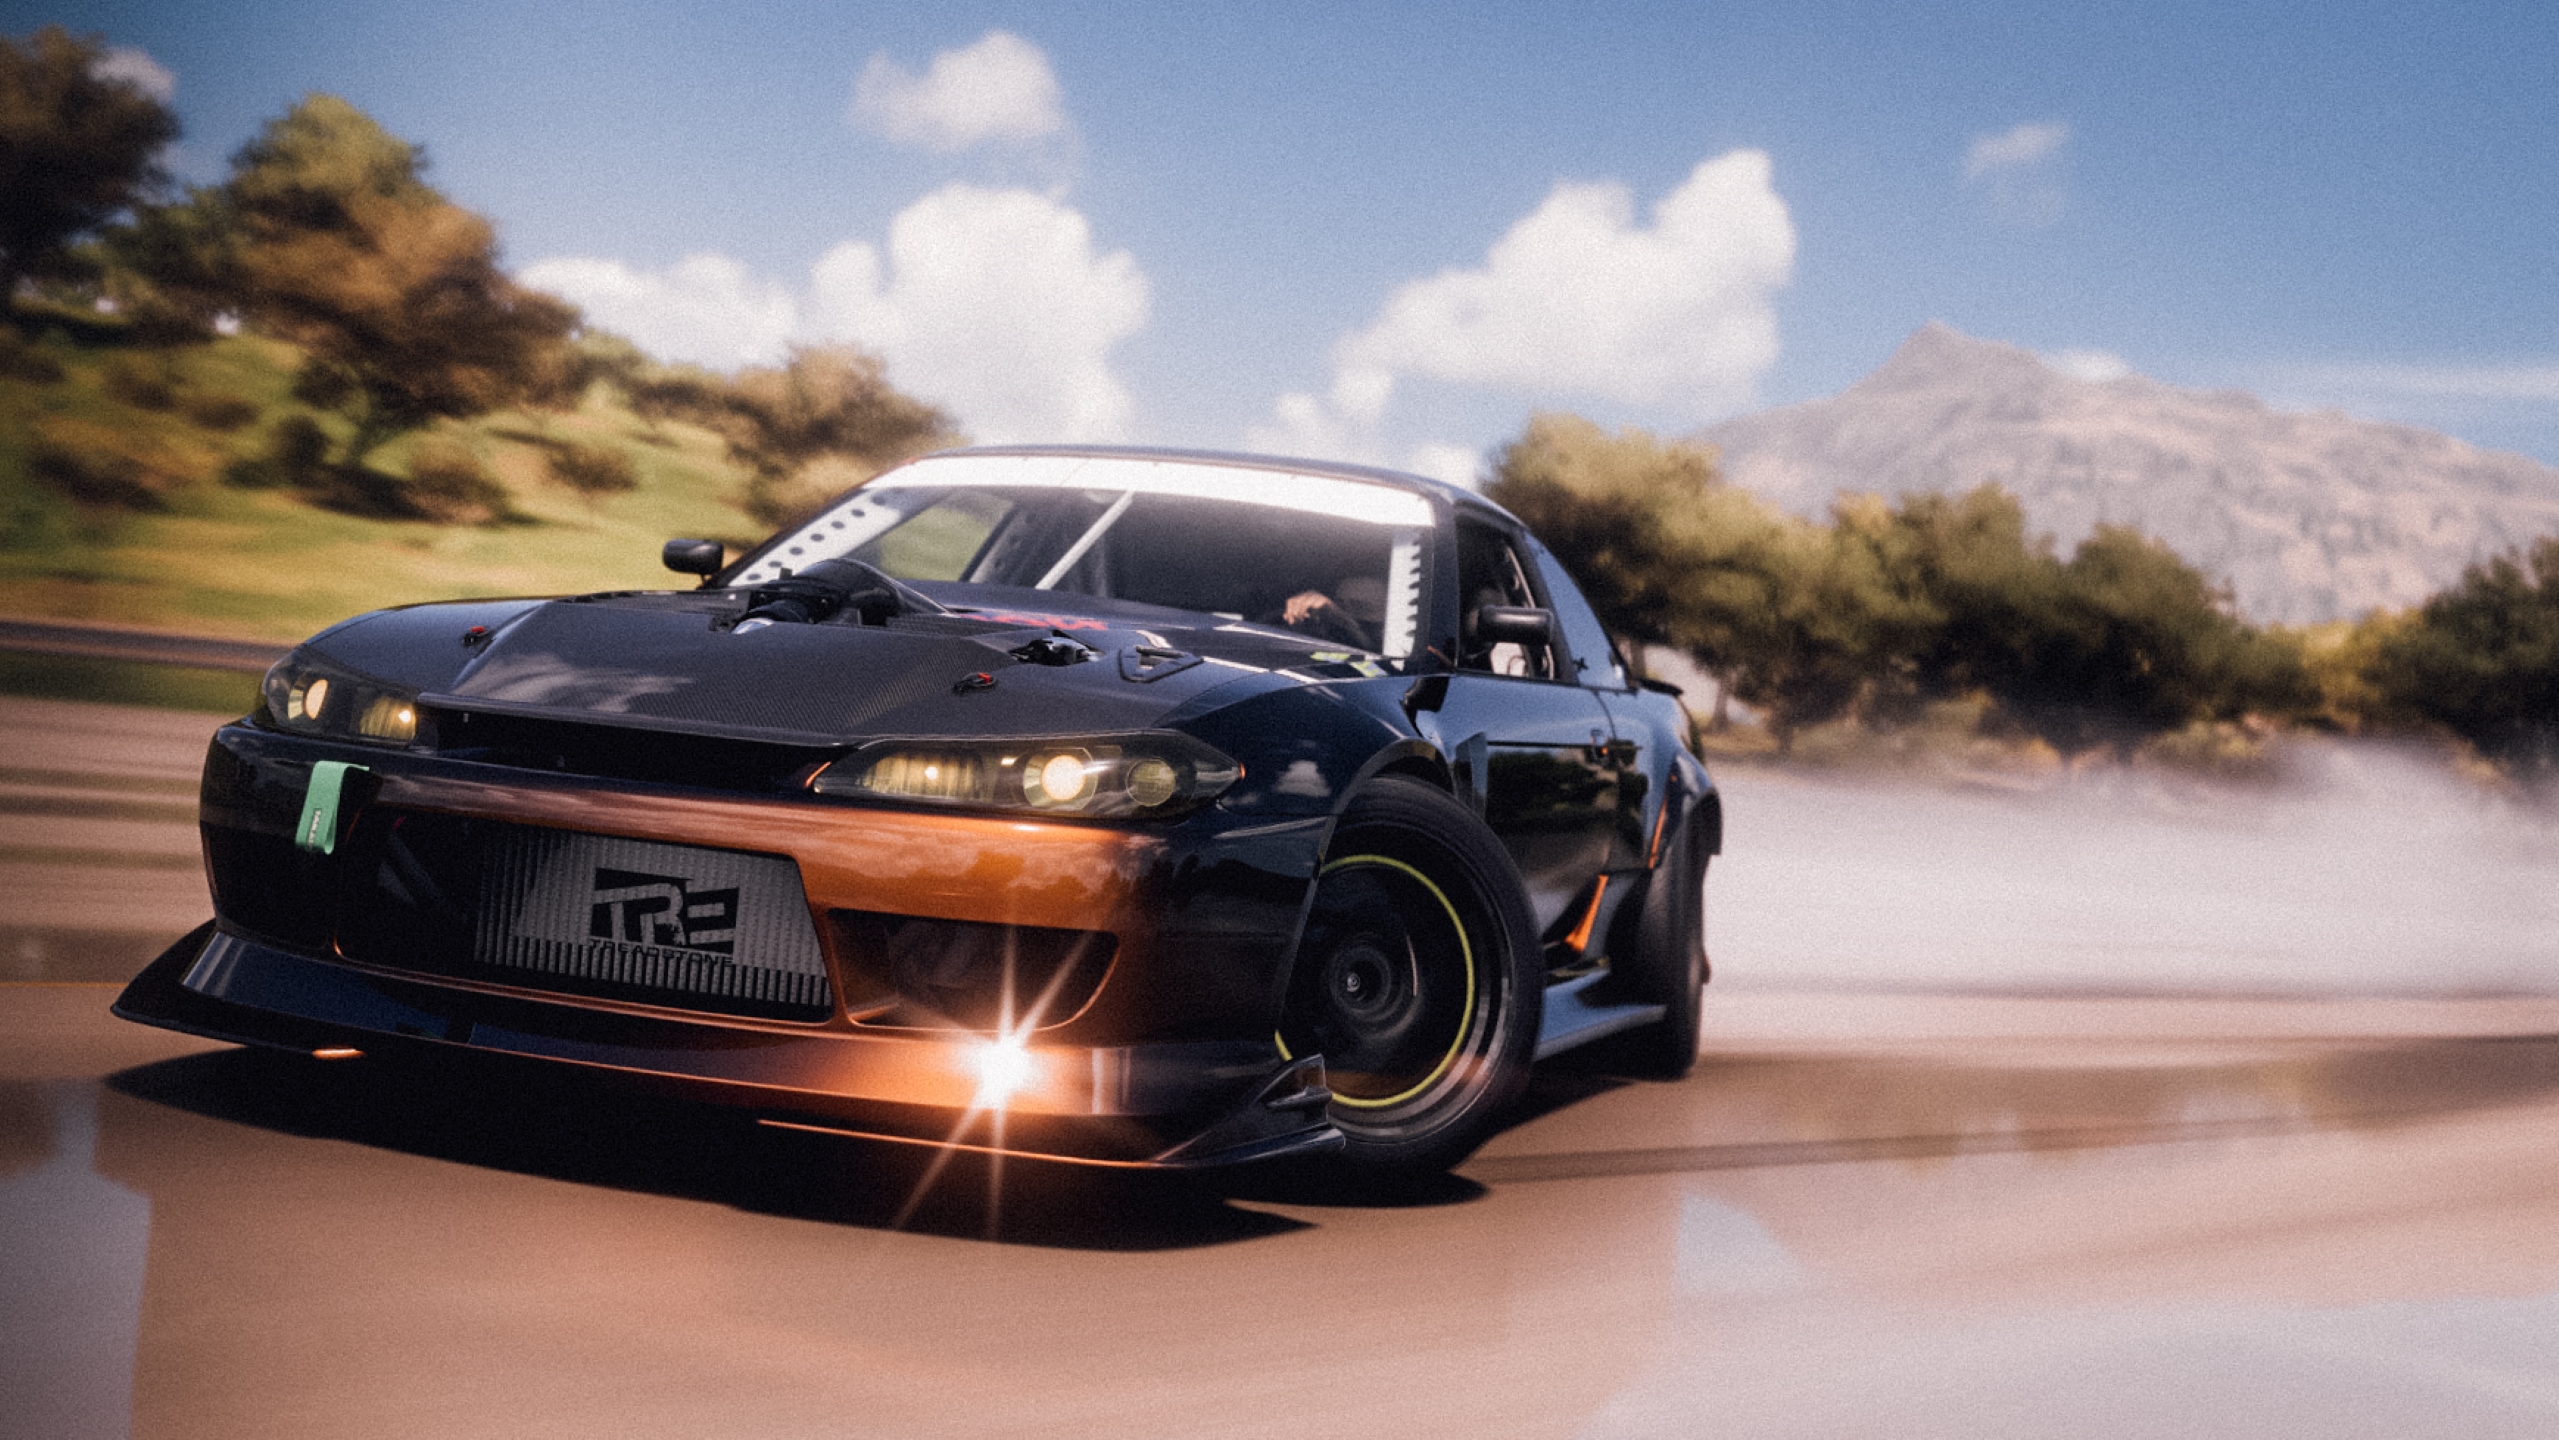 Forza Horizon 5 Forza Nissan Drift Drift Cars Video Games Front Angle View Trees Sky Clouds Road Car 2559x1440